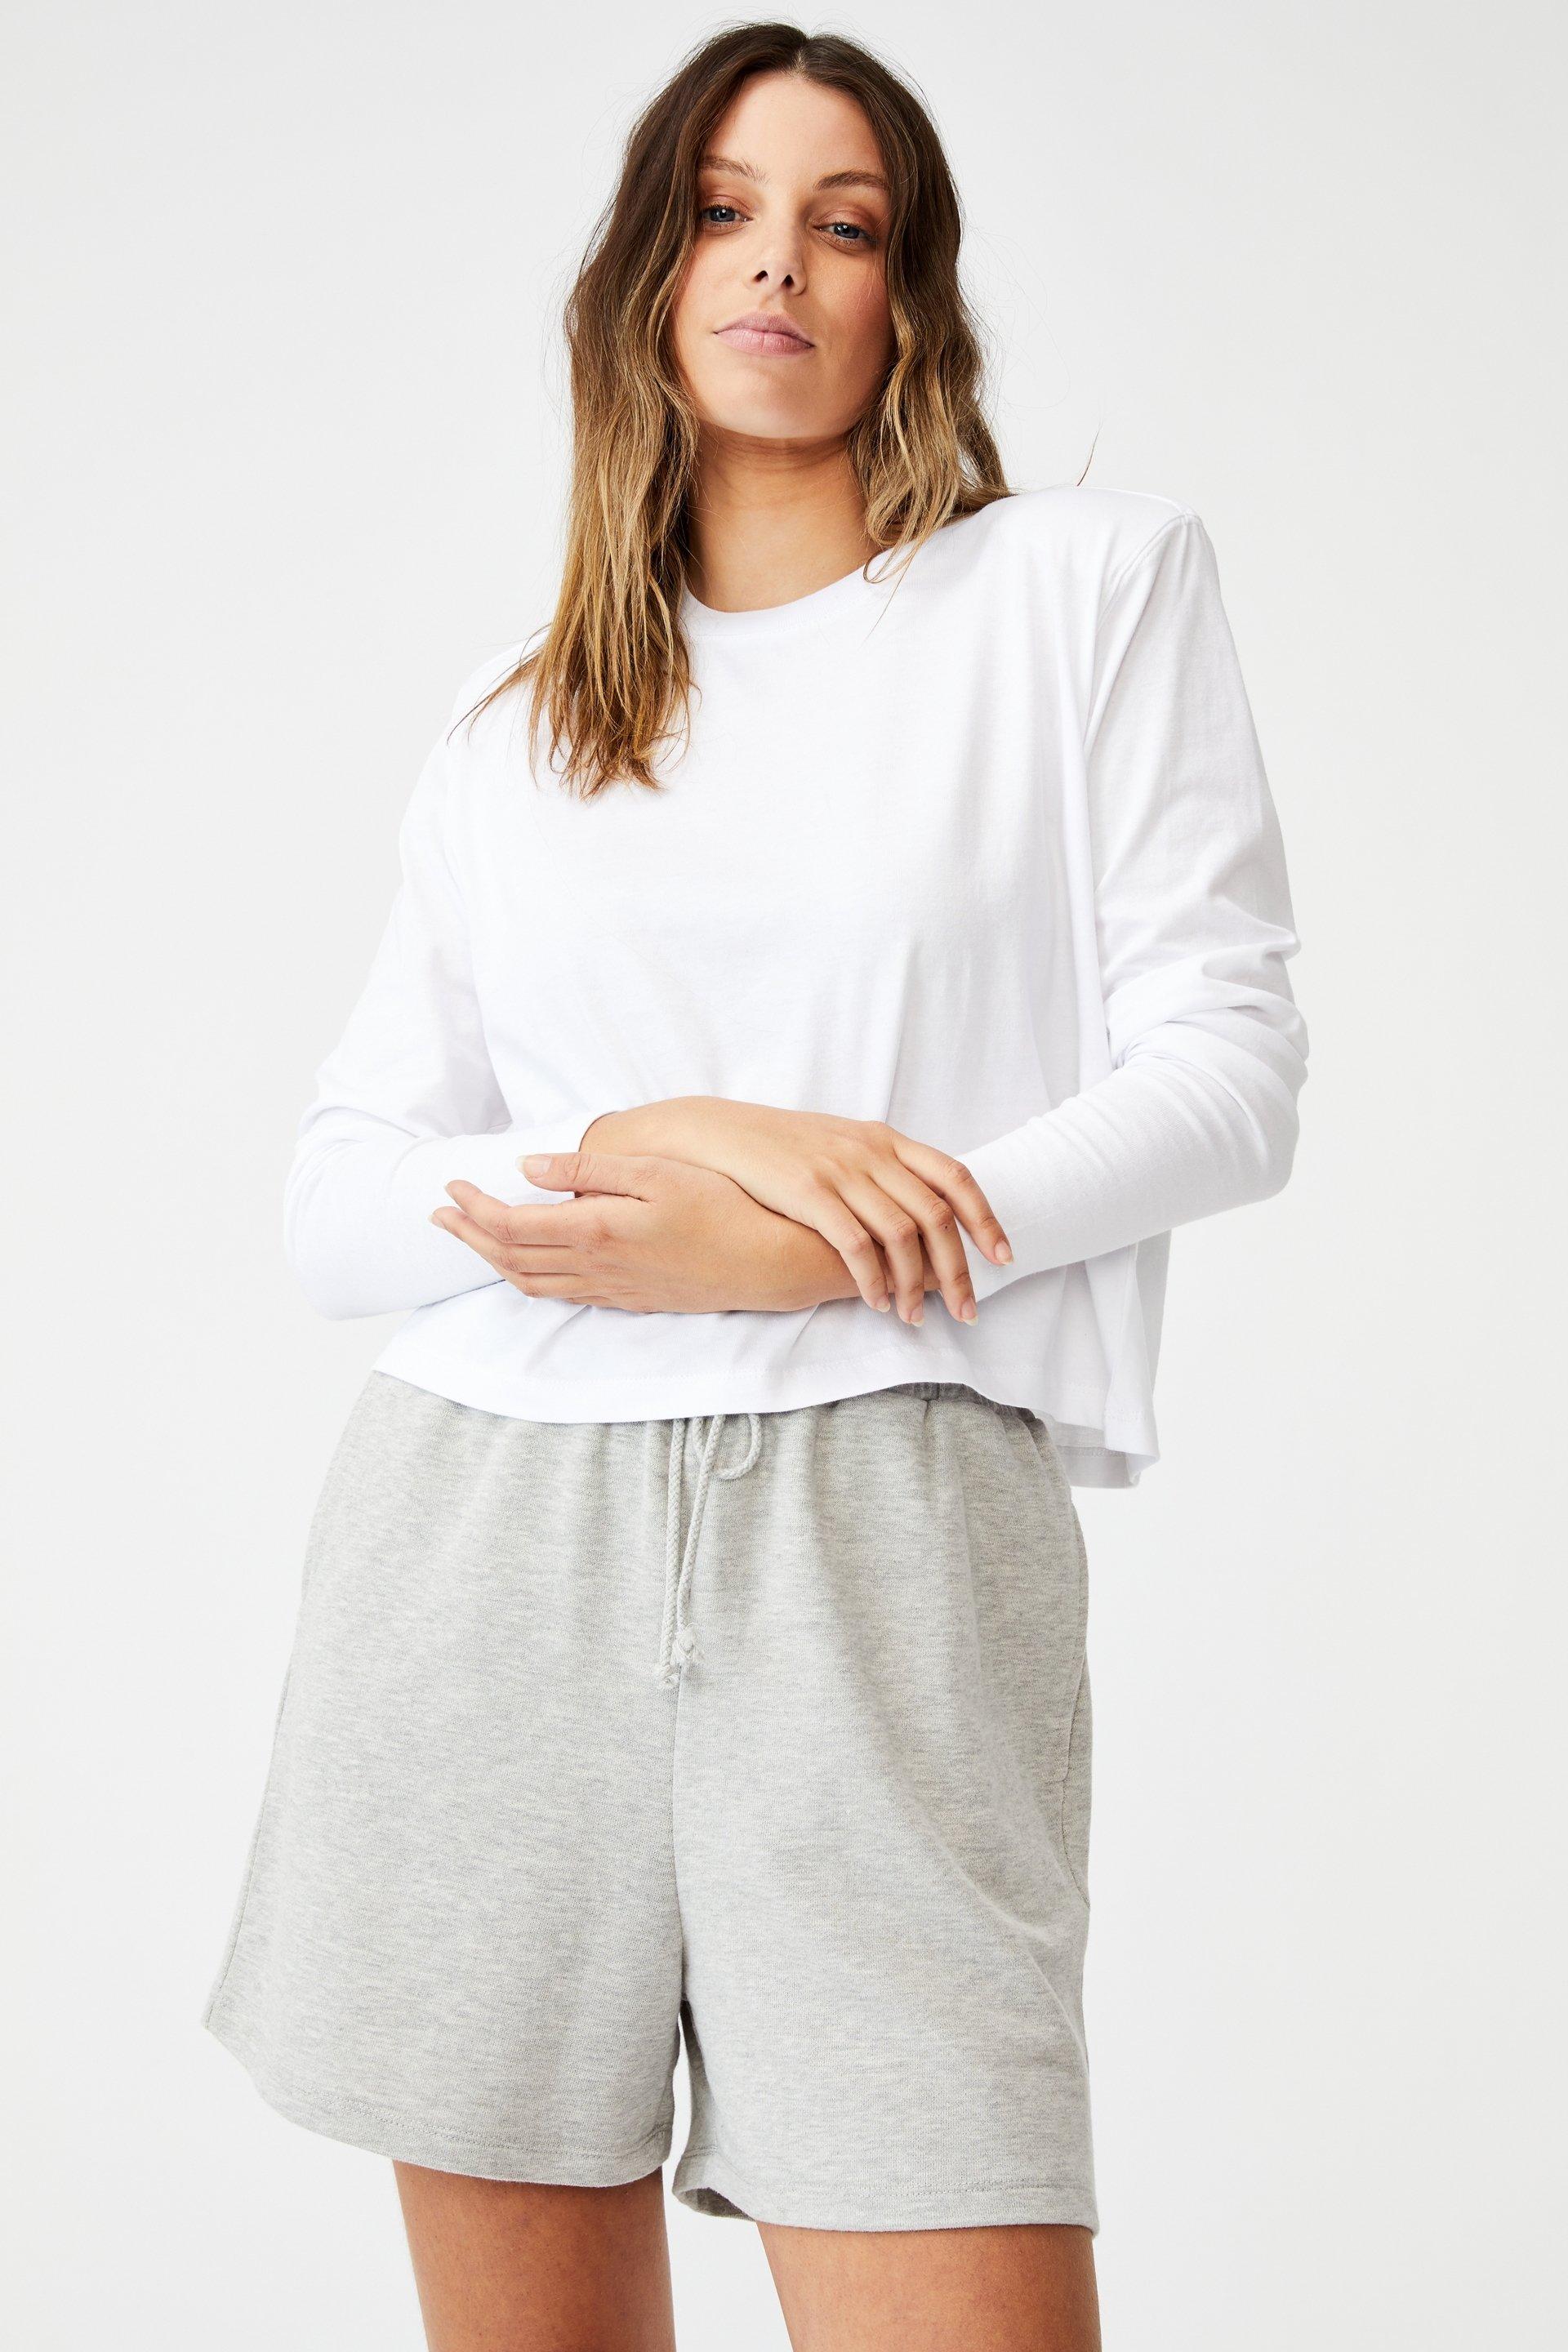 Padded Shoulder Long Sleeve Top White Cotton On T Shirts Vests And Camis 